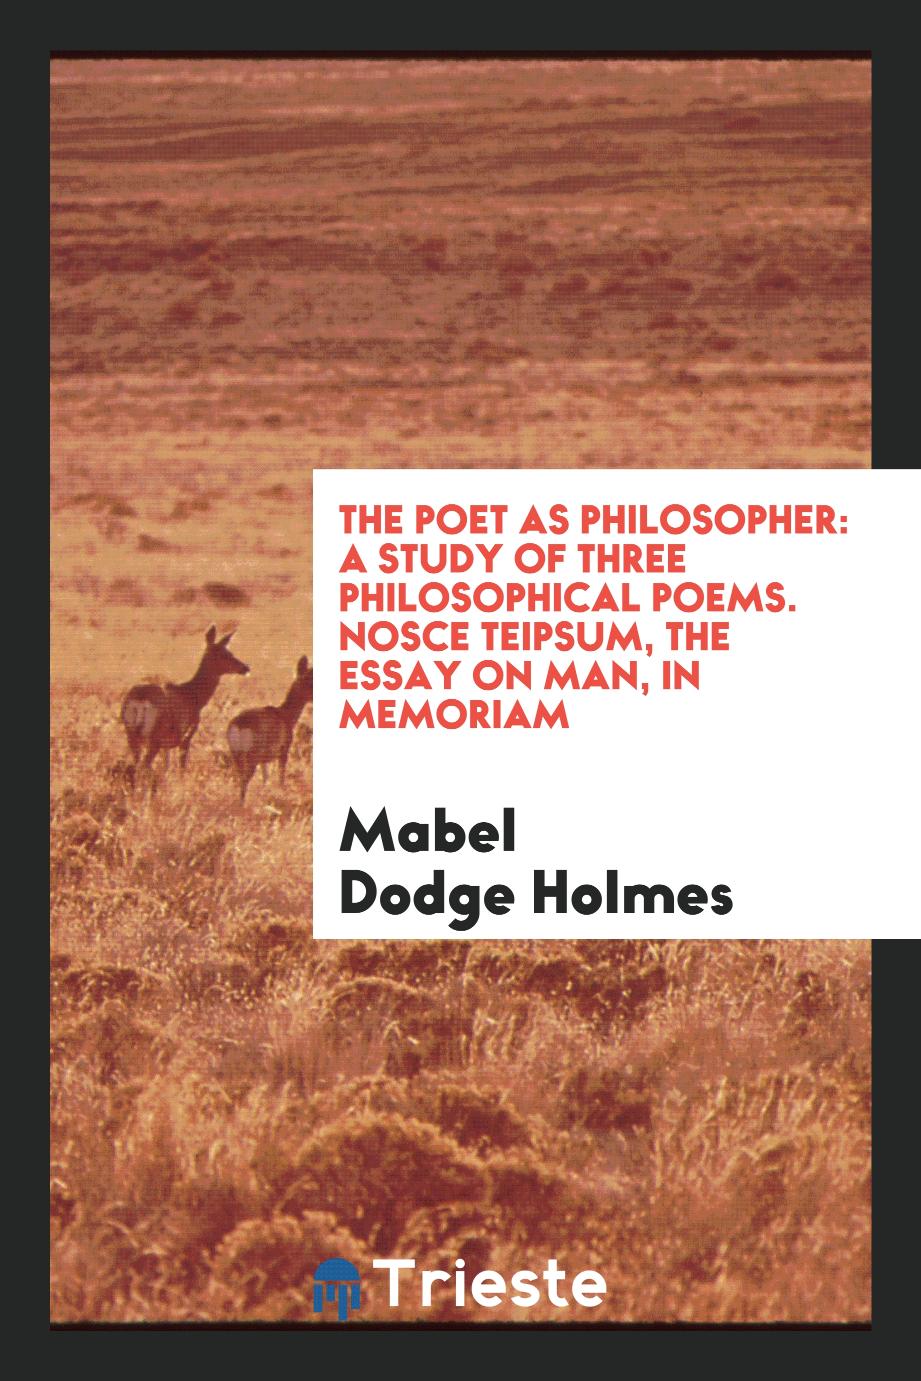 The poet as philosopher: a study of three philosophical poems. Nosce teipsum, The essay on man, In memoriam